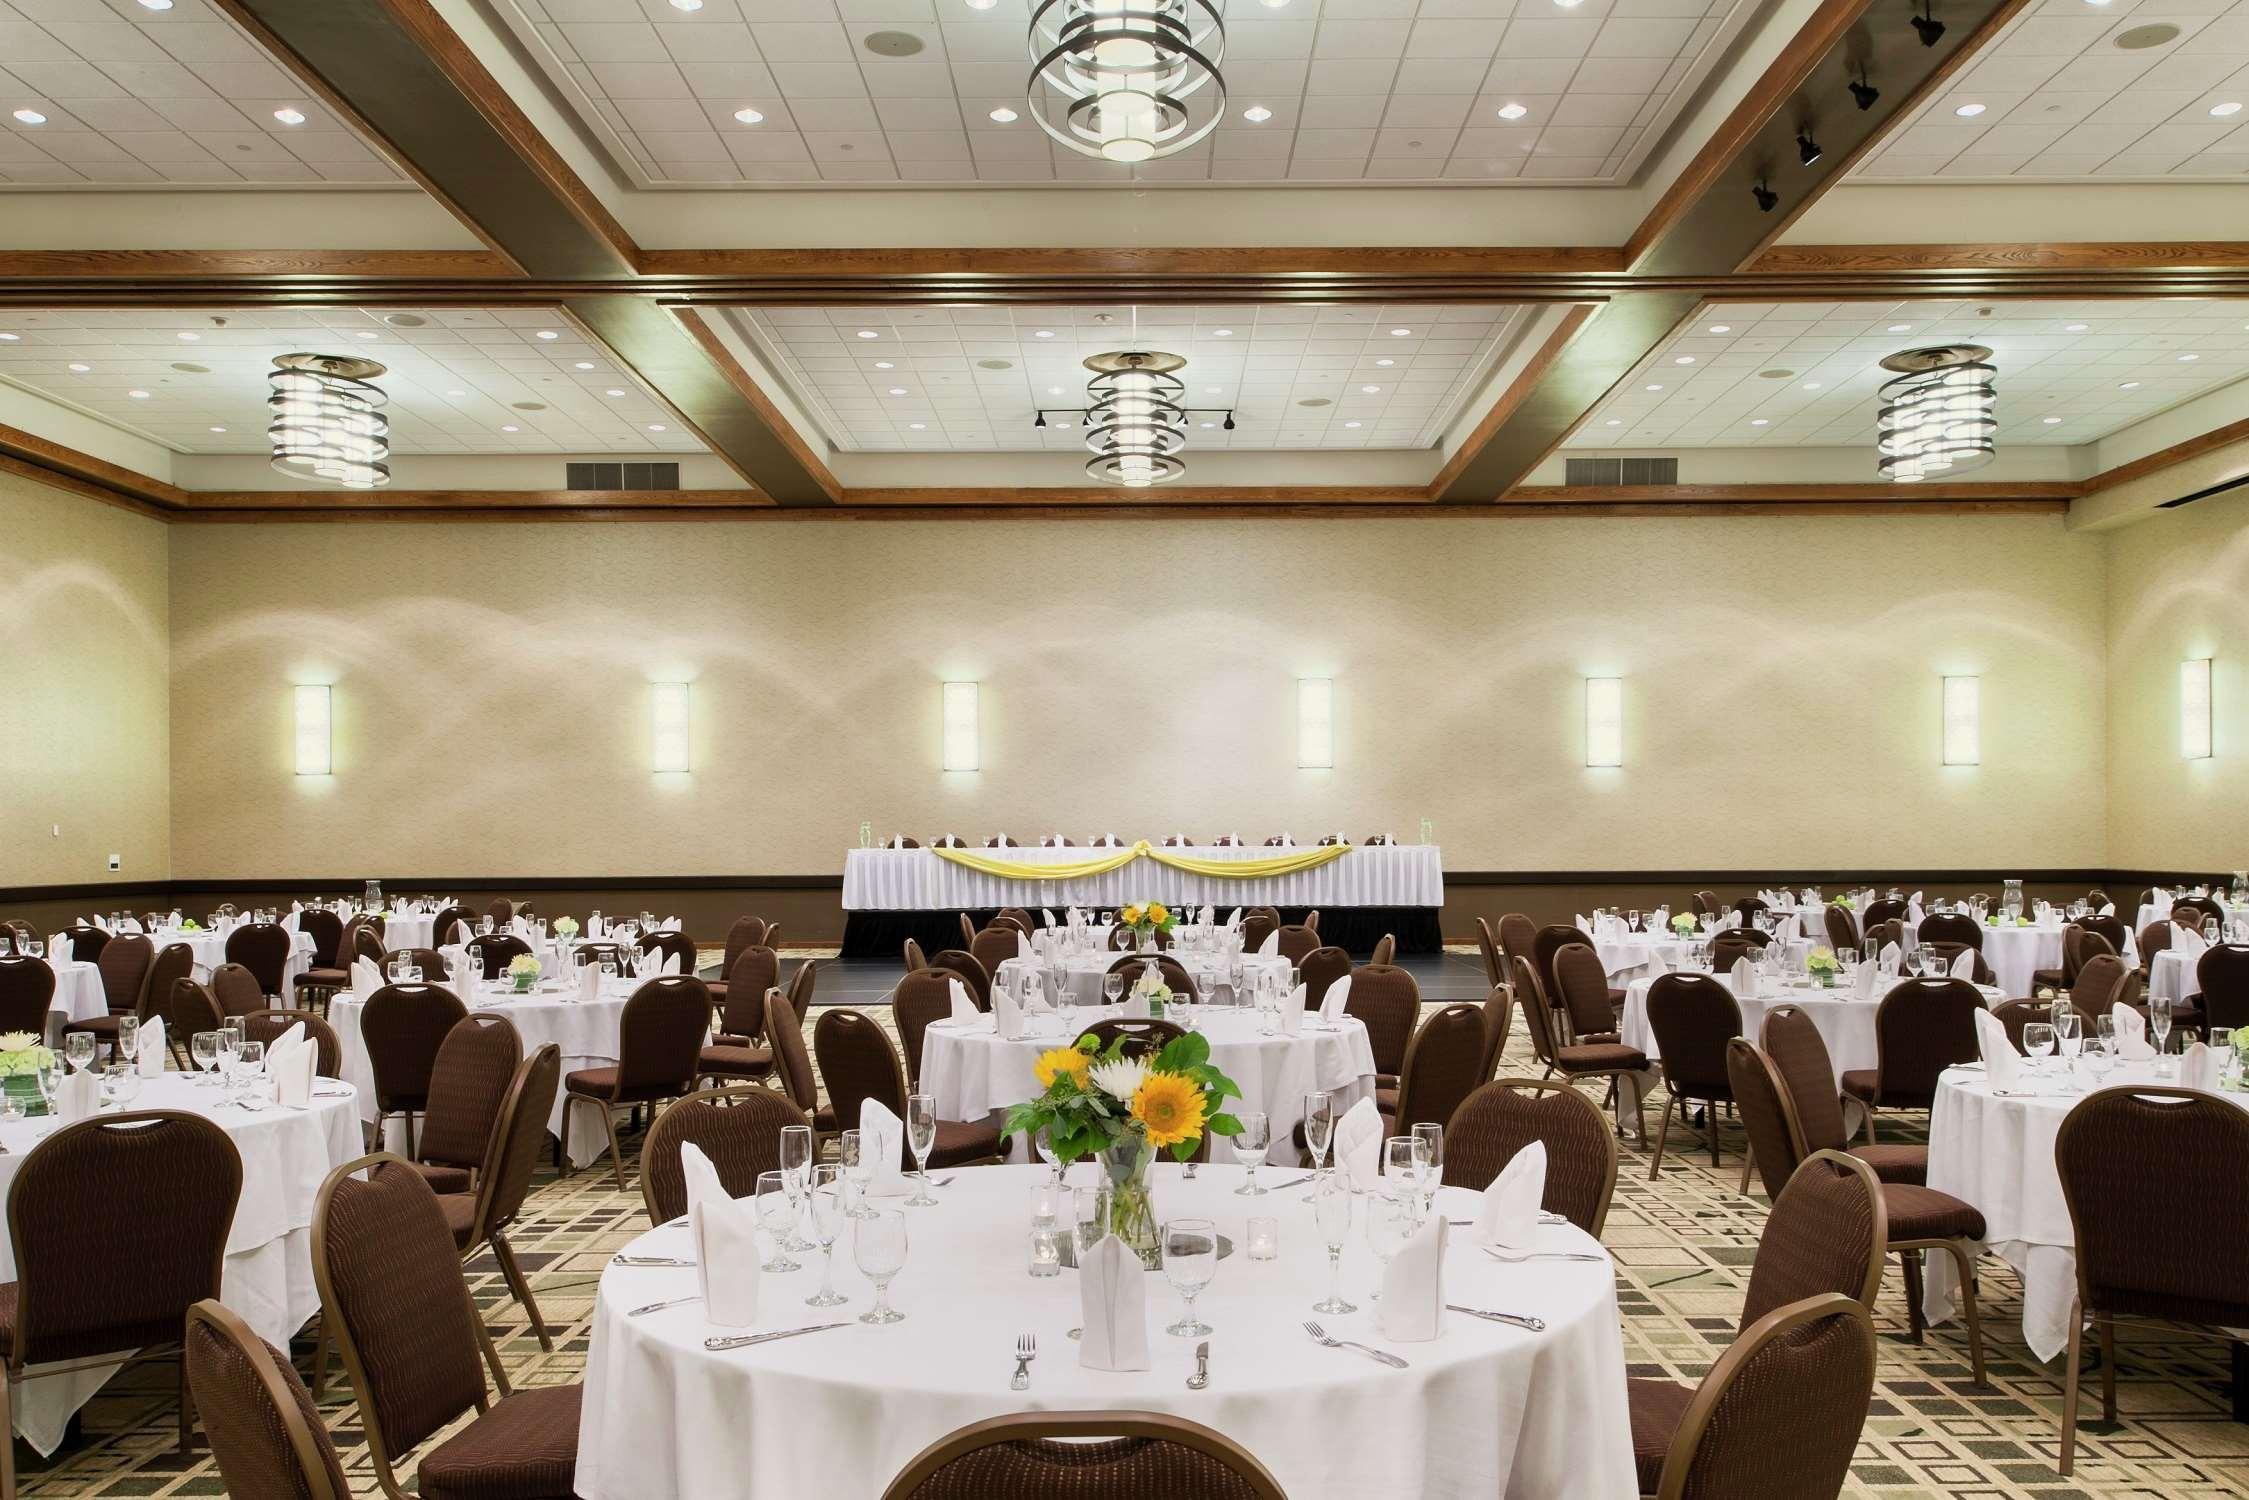 Doubletree By Hilton Hotel & Executive Meeting Center Omaha-Downtown Restaurant photo